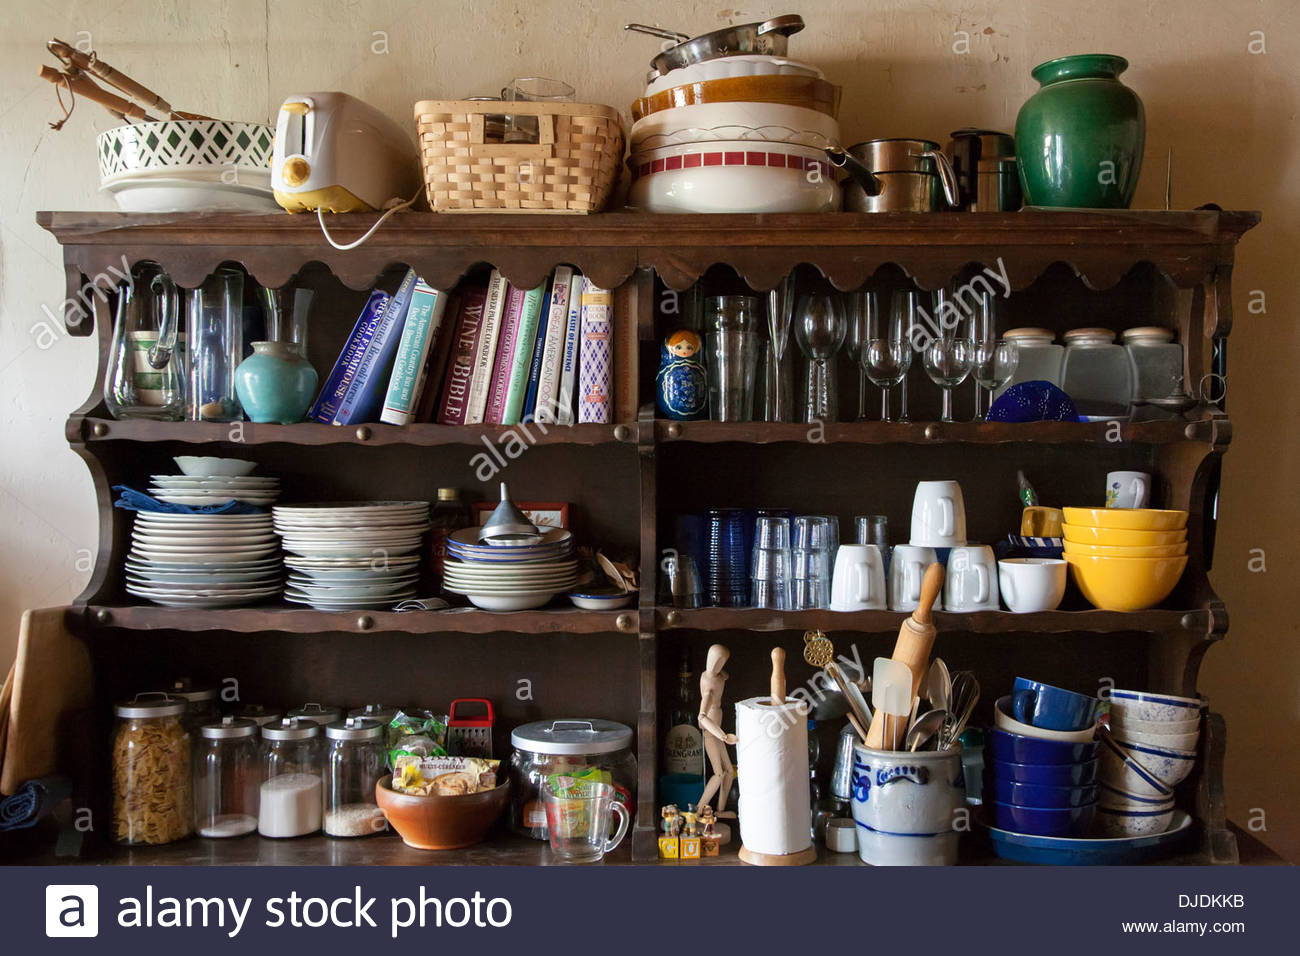 Messy Shelves In Kitchen Full Of Cookbooks Food And Dishes Stock